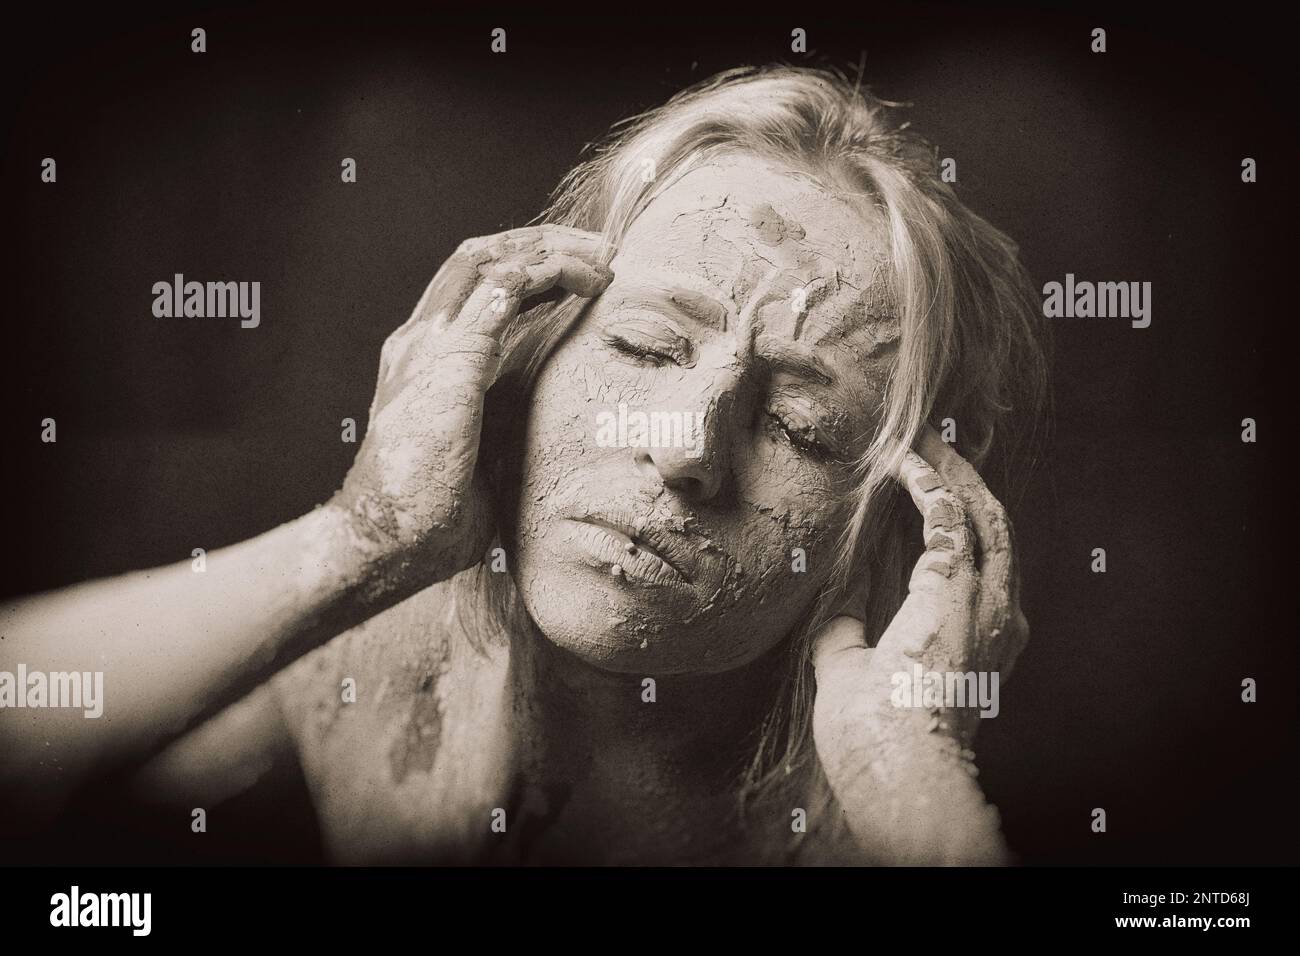 rinkled face of woman covered in dry cracked clay mask holding her head in pain, creative filtered grainy image Stock Photo